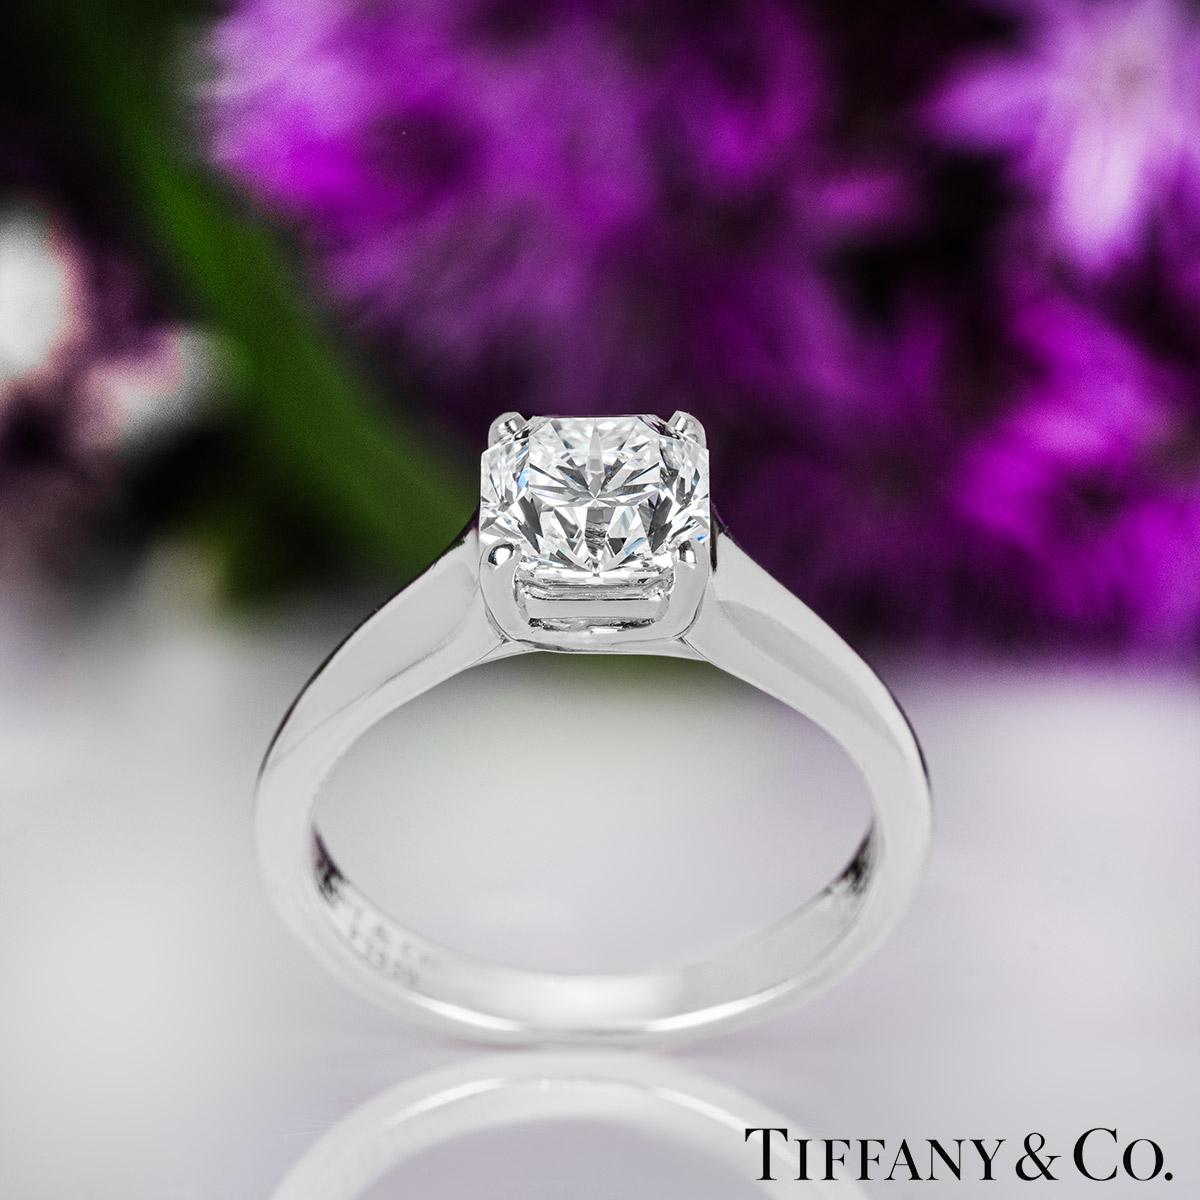 Tiffany & Co. Lucida Cut Diamond Solitaire Ring 1.27 Carat GIA Certified In Excellent Condition For Sale In London, GB